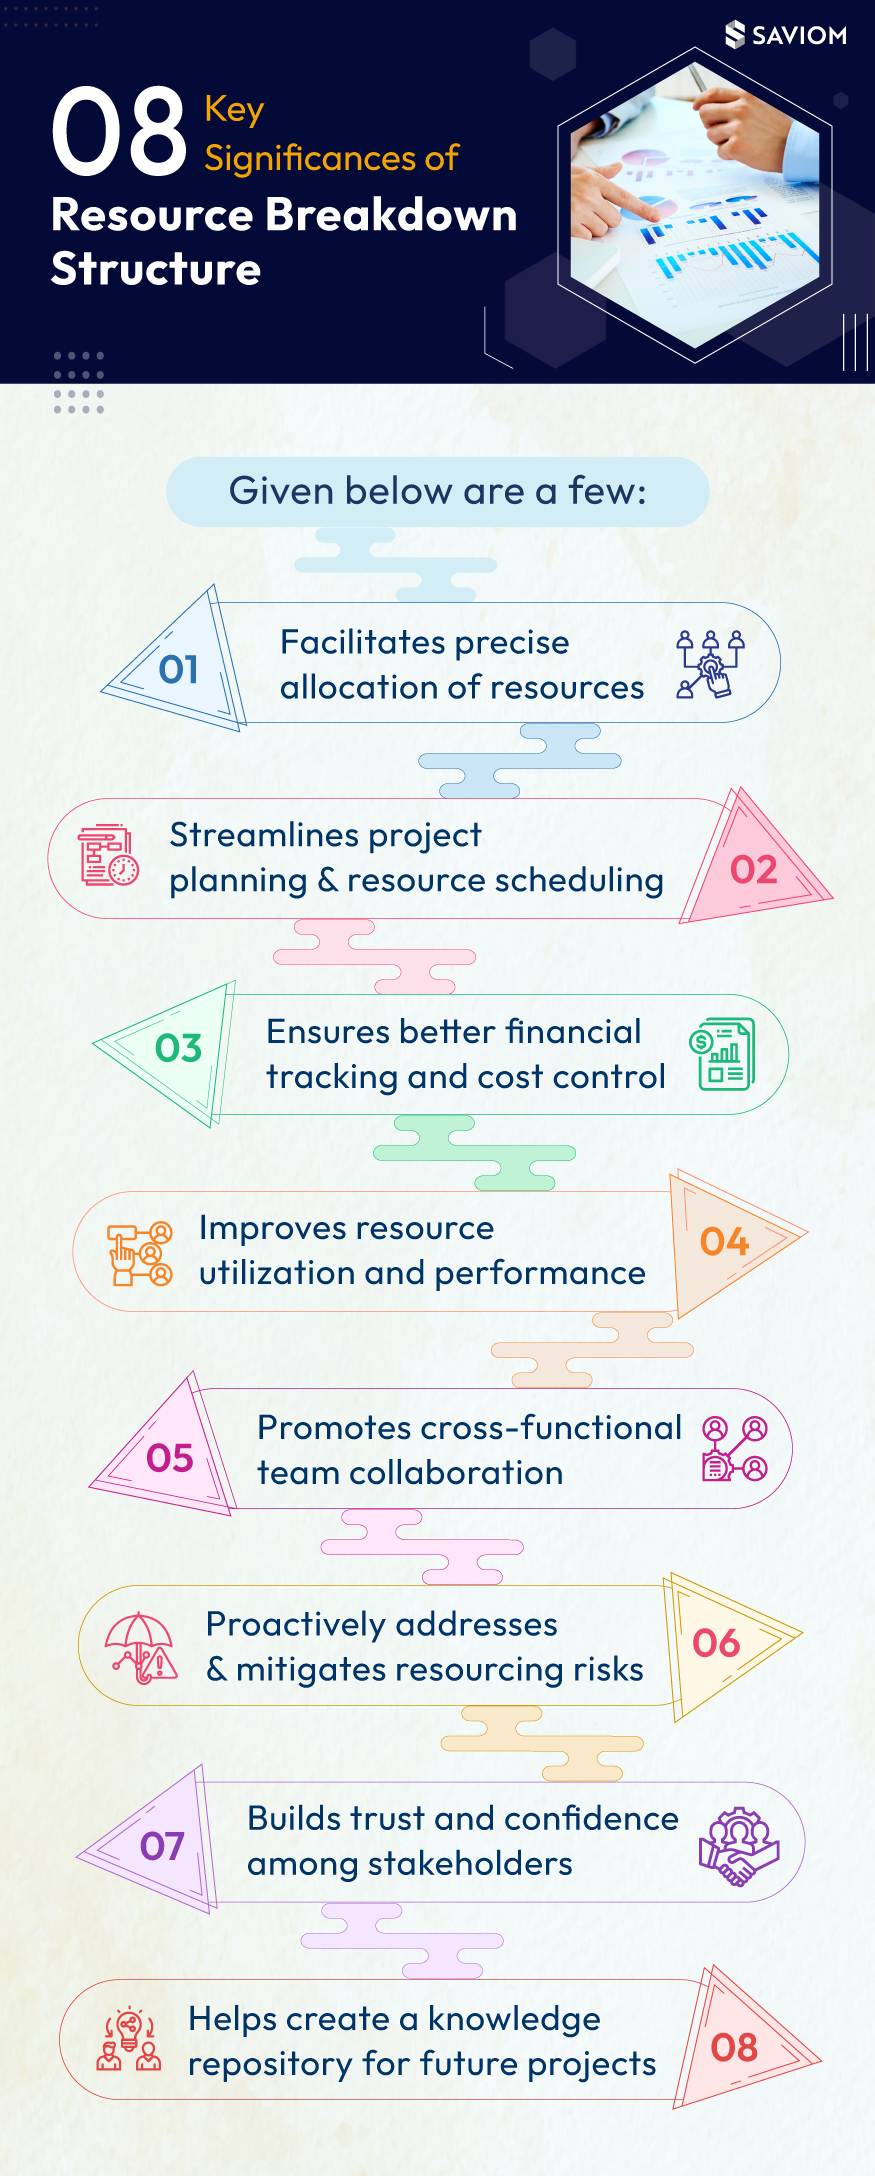 8 Key Significances of Resource Breakdown Structure